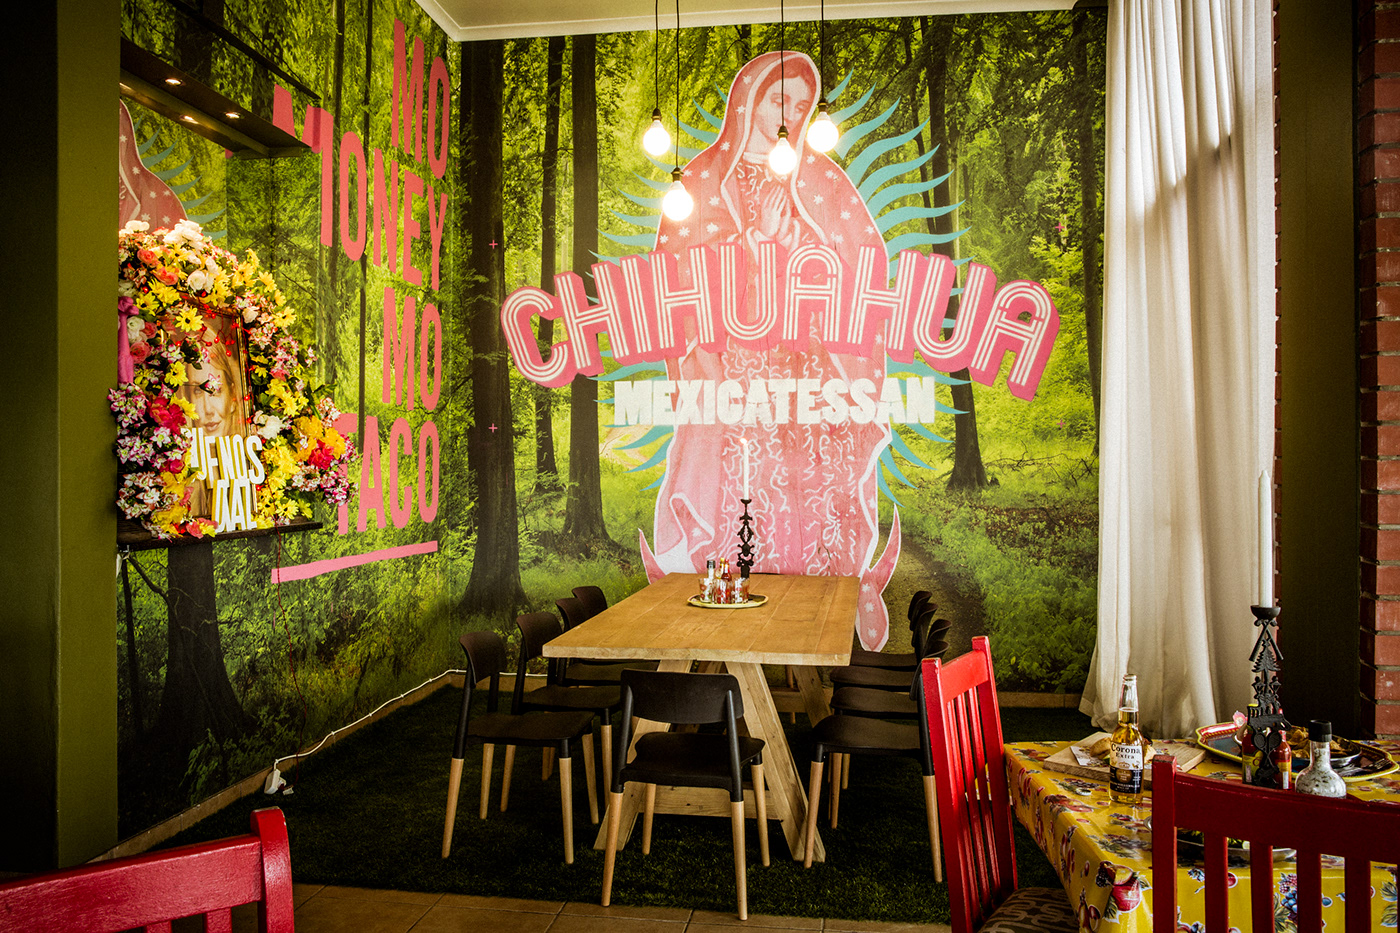 restaurant Mexican installations Mural wheatpaste poster Hospitality pink Pop-up store signpainting